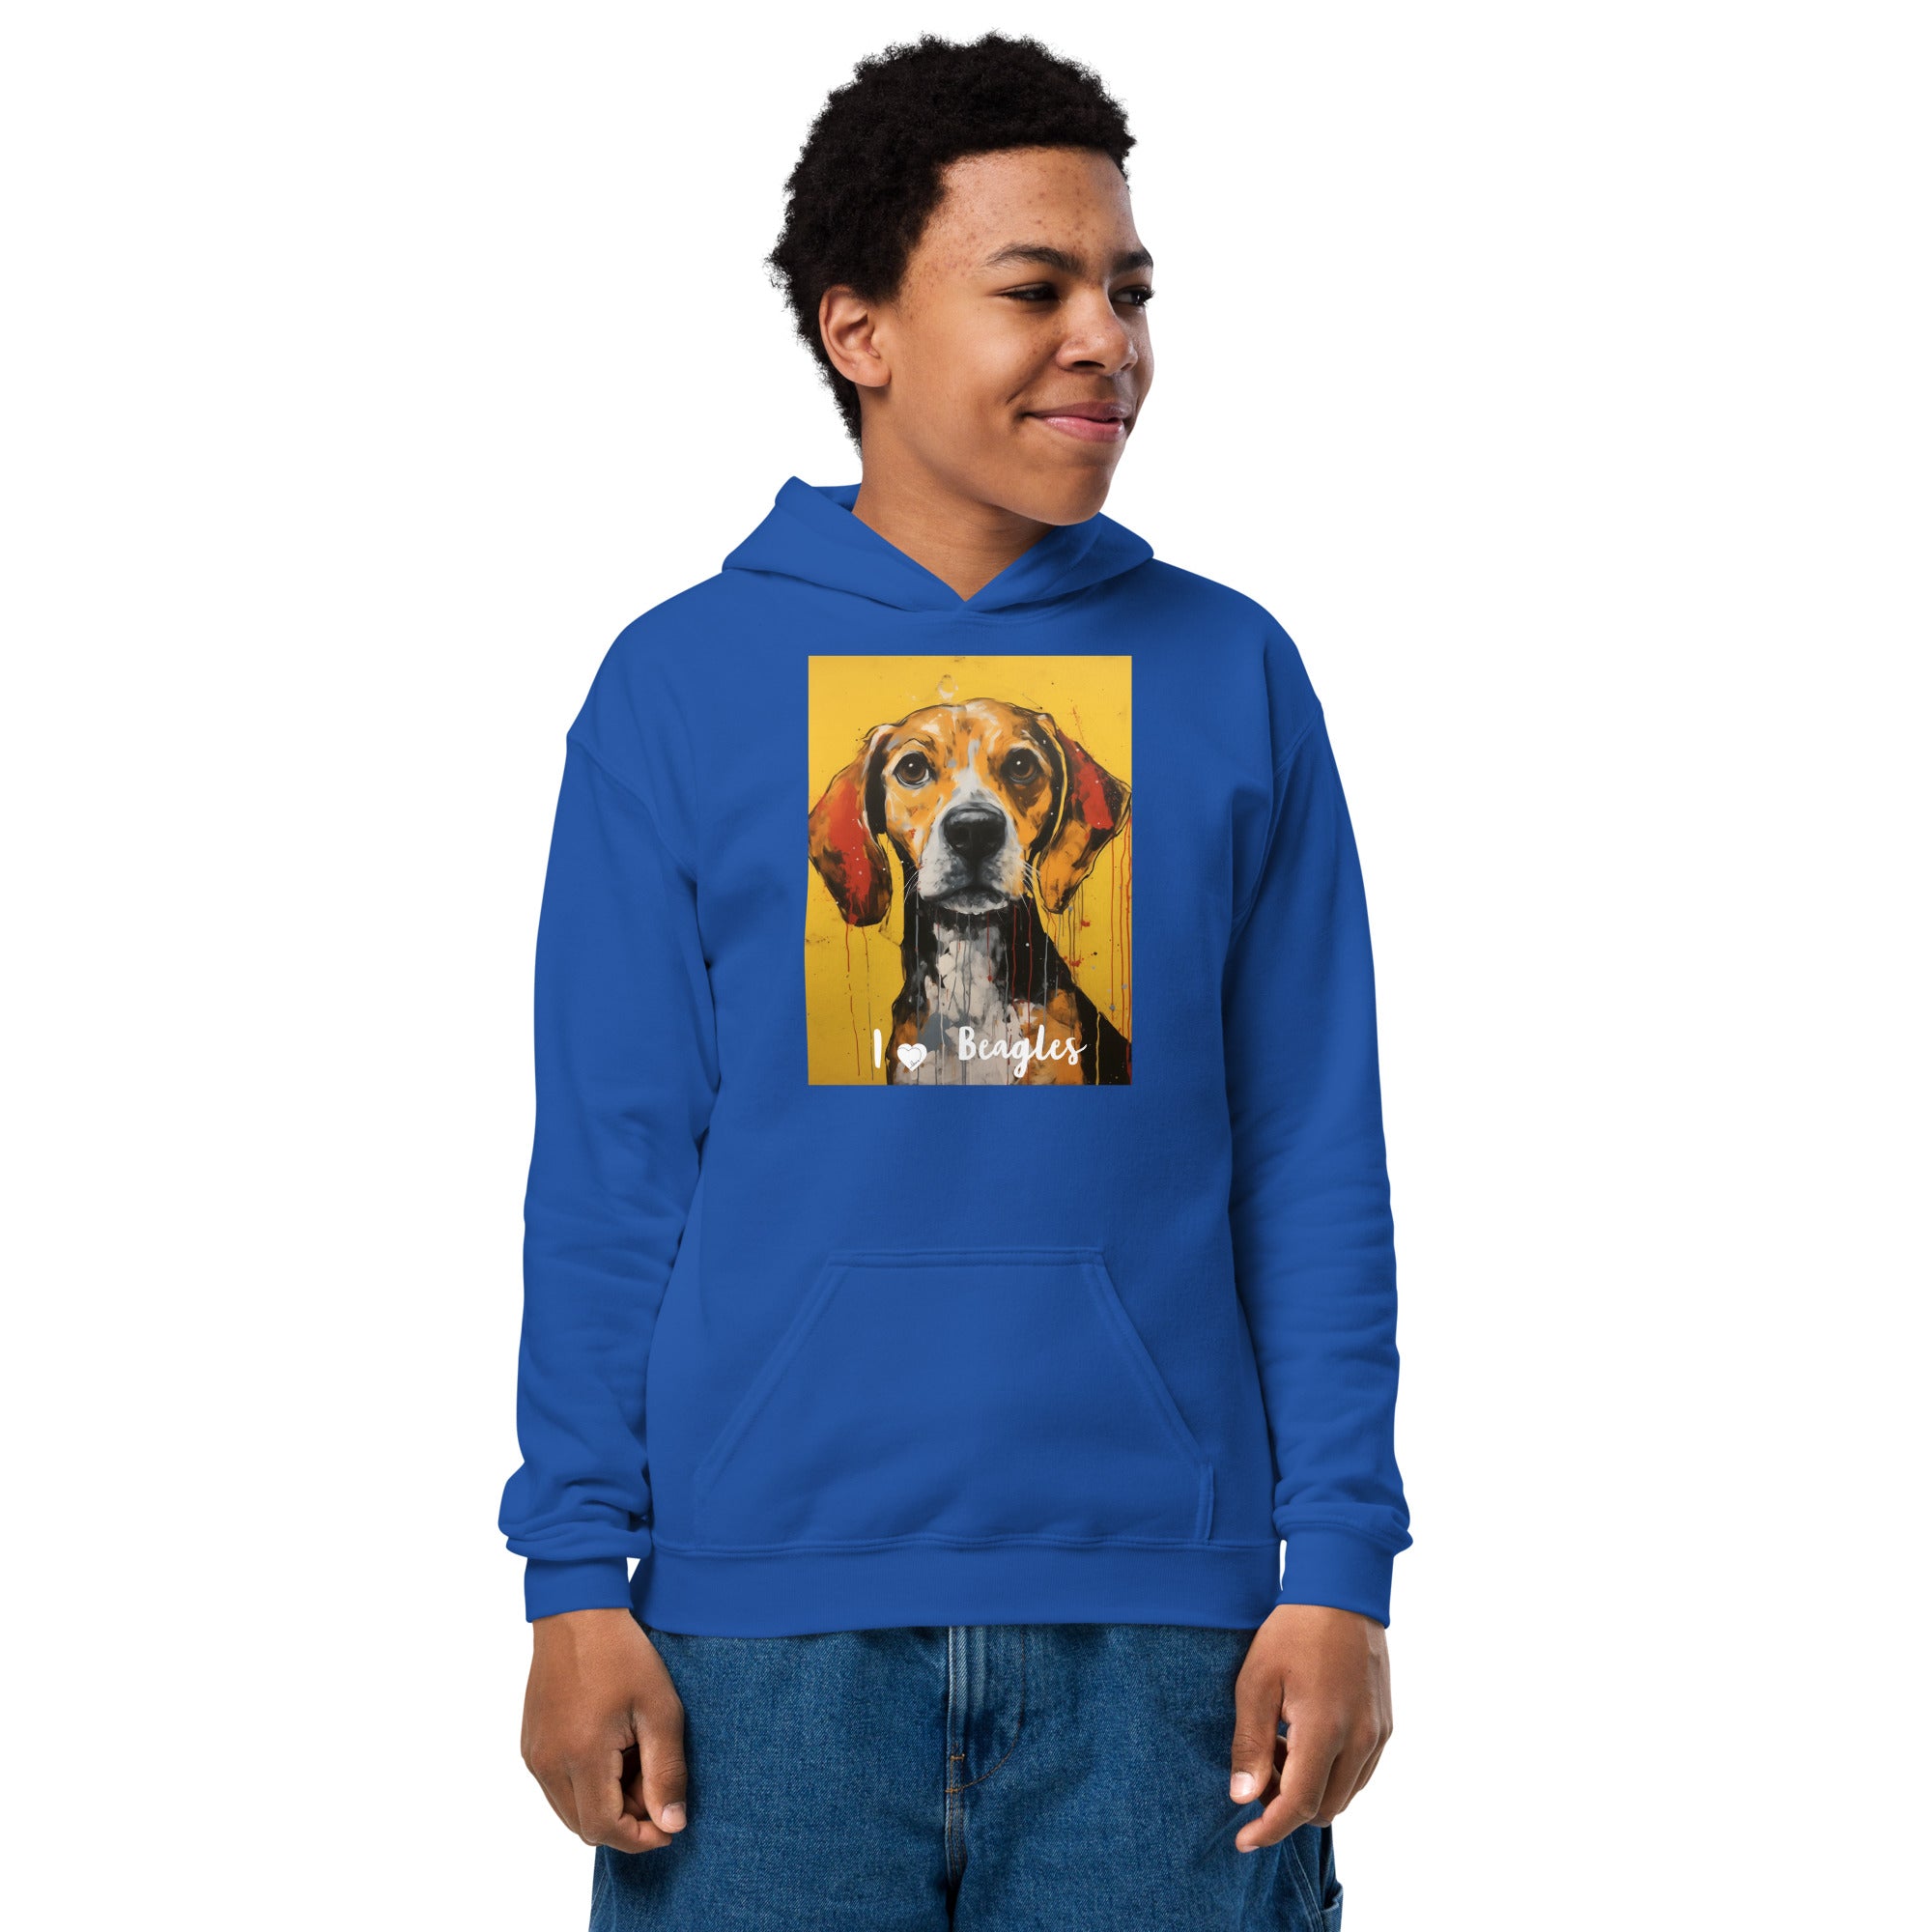 Youth heavy blend hoodie I ❤ Dogs - Beagle